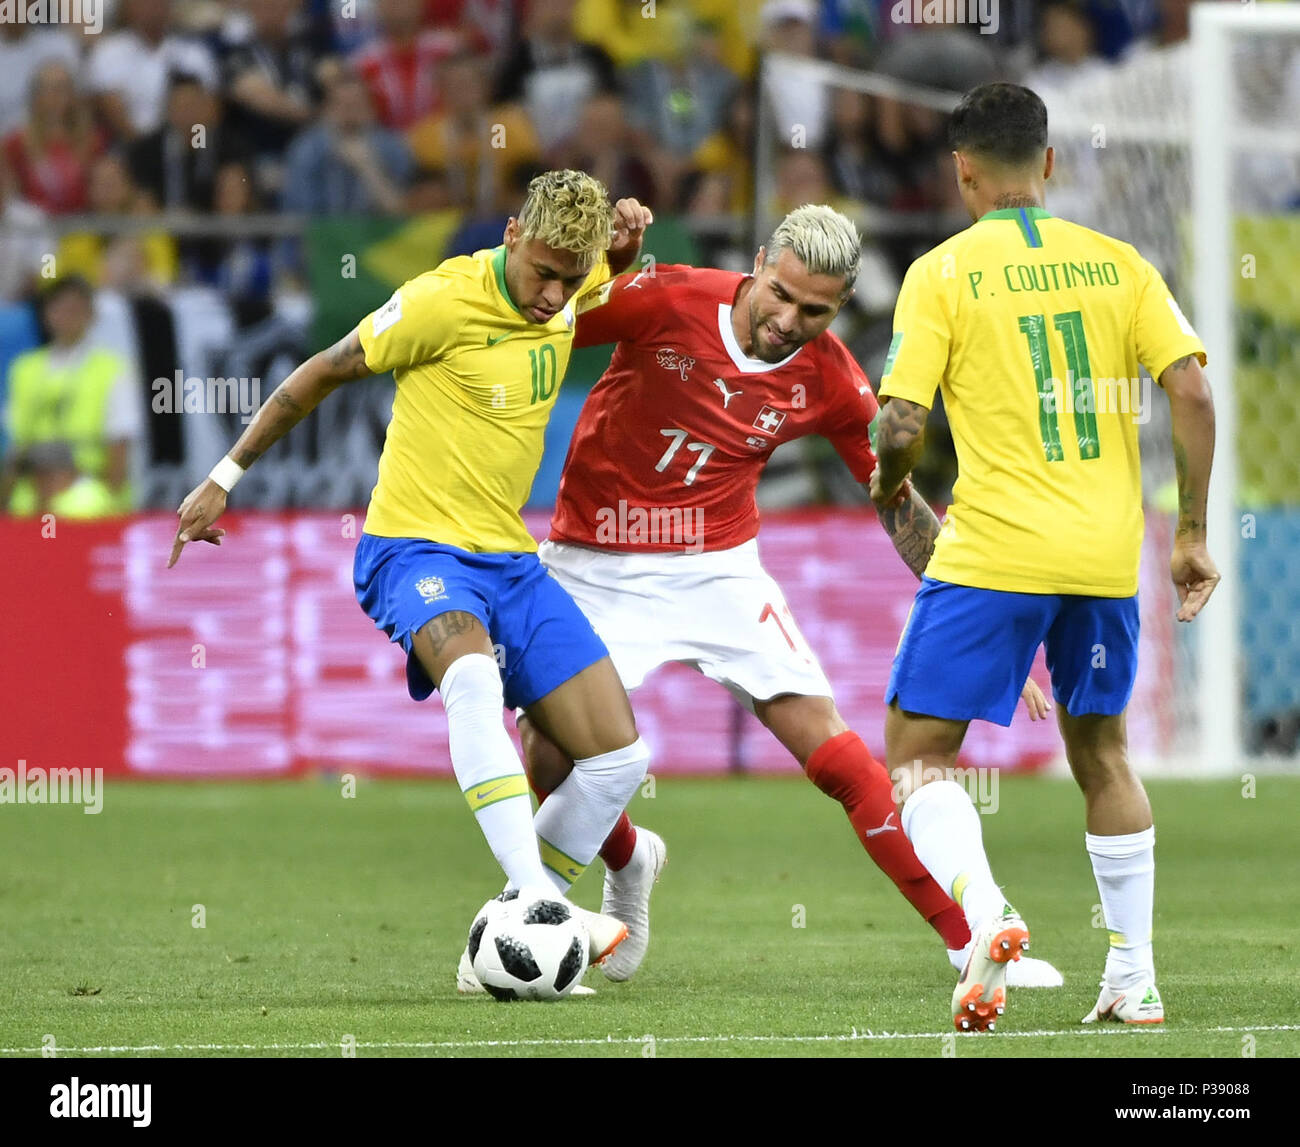 Rostov On Don. 17th June, 2018. Valon Behrami (C) of Switzerland vies with Neymar (L) of Brazil during a group E match between Brazil and Switzerland at the 2018 FIFA World Cup in Rostov-on-Don, Russia, June 17, 2018. The match ended in a 1-1 draw. Credit: Chen Yichen/Xinhua/Alamy Live News Stock Photo